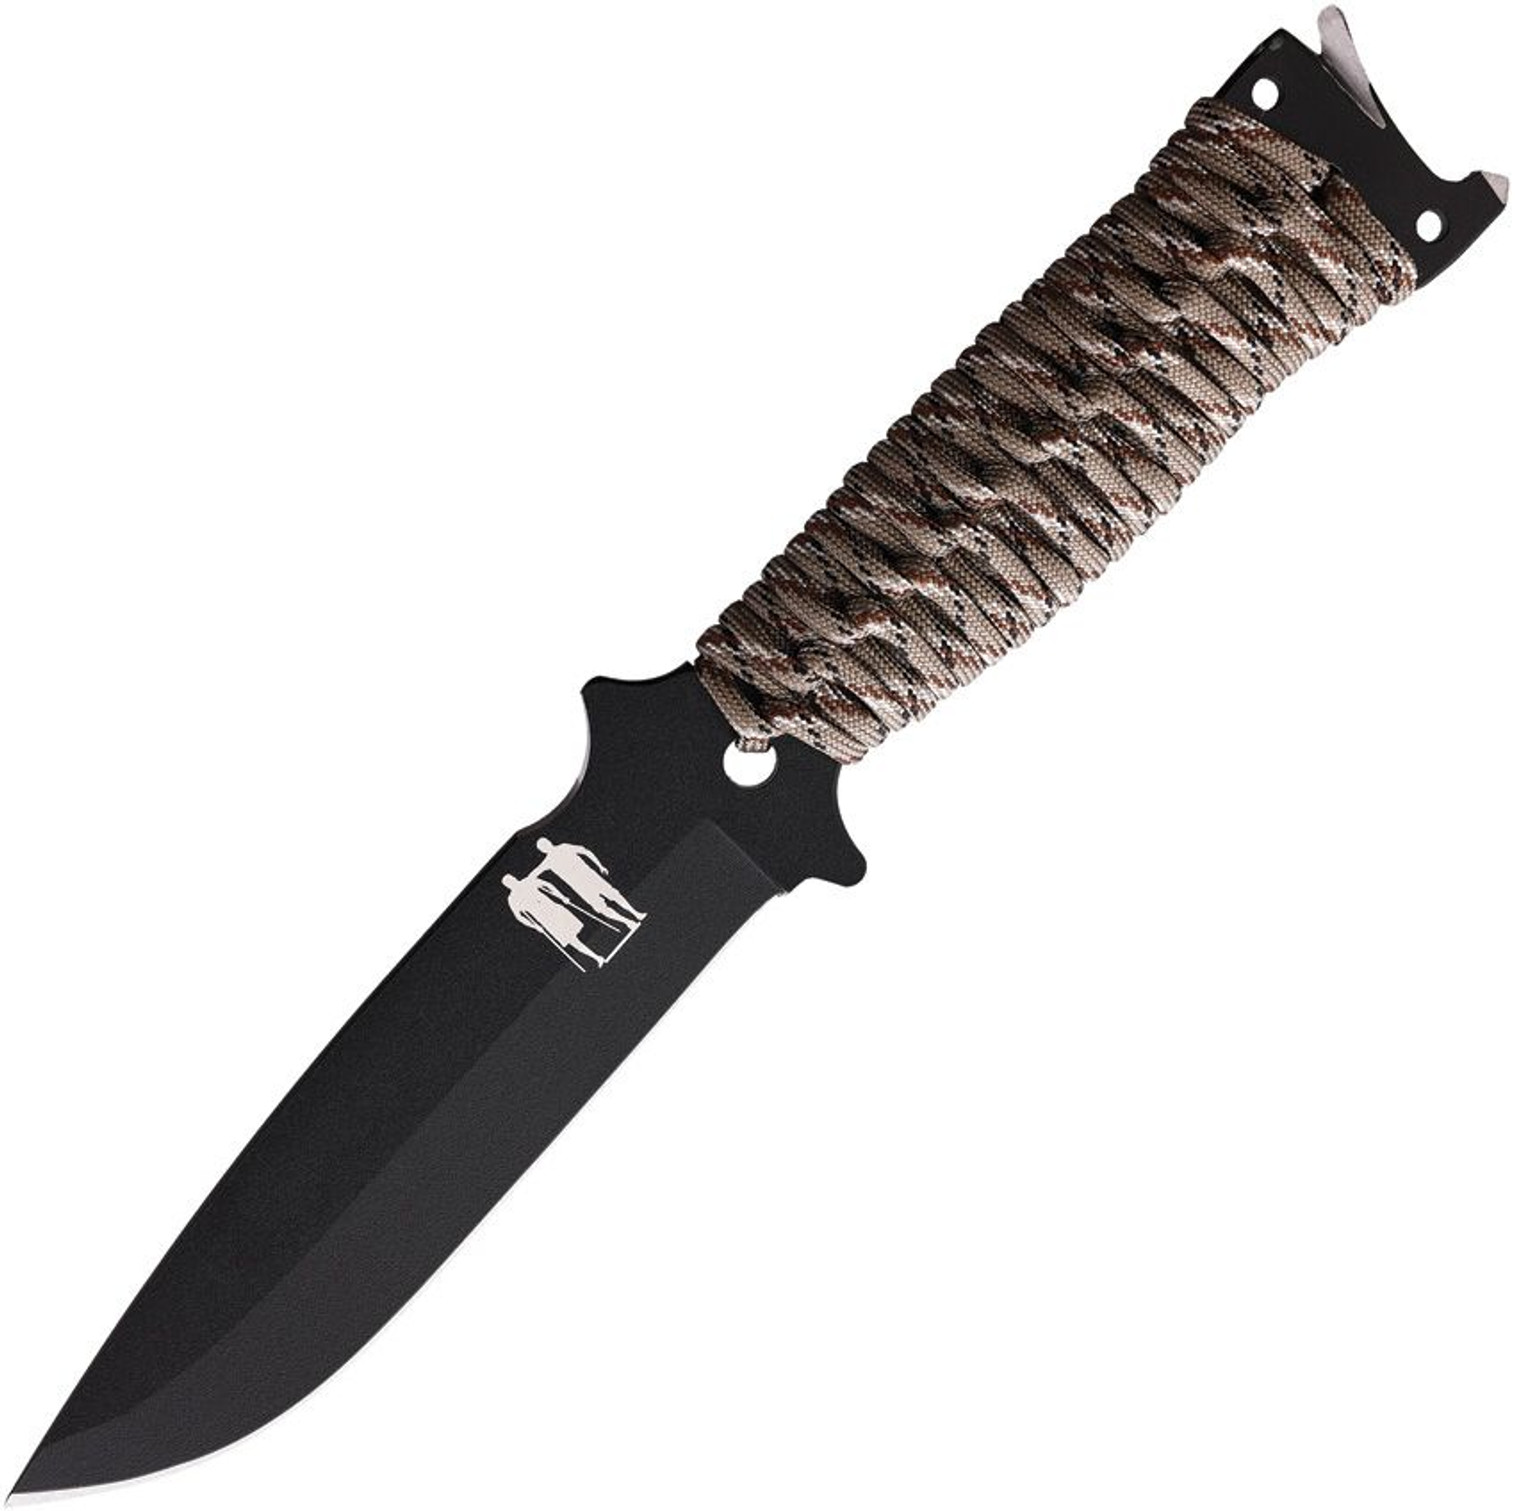 KRS Survival Fixed Blade